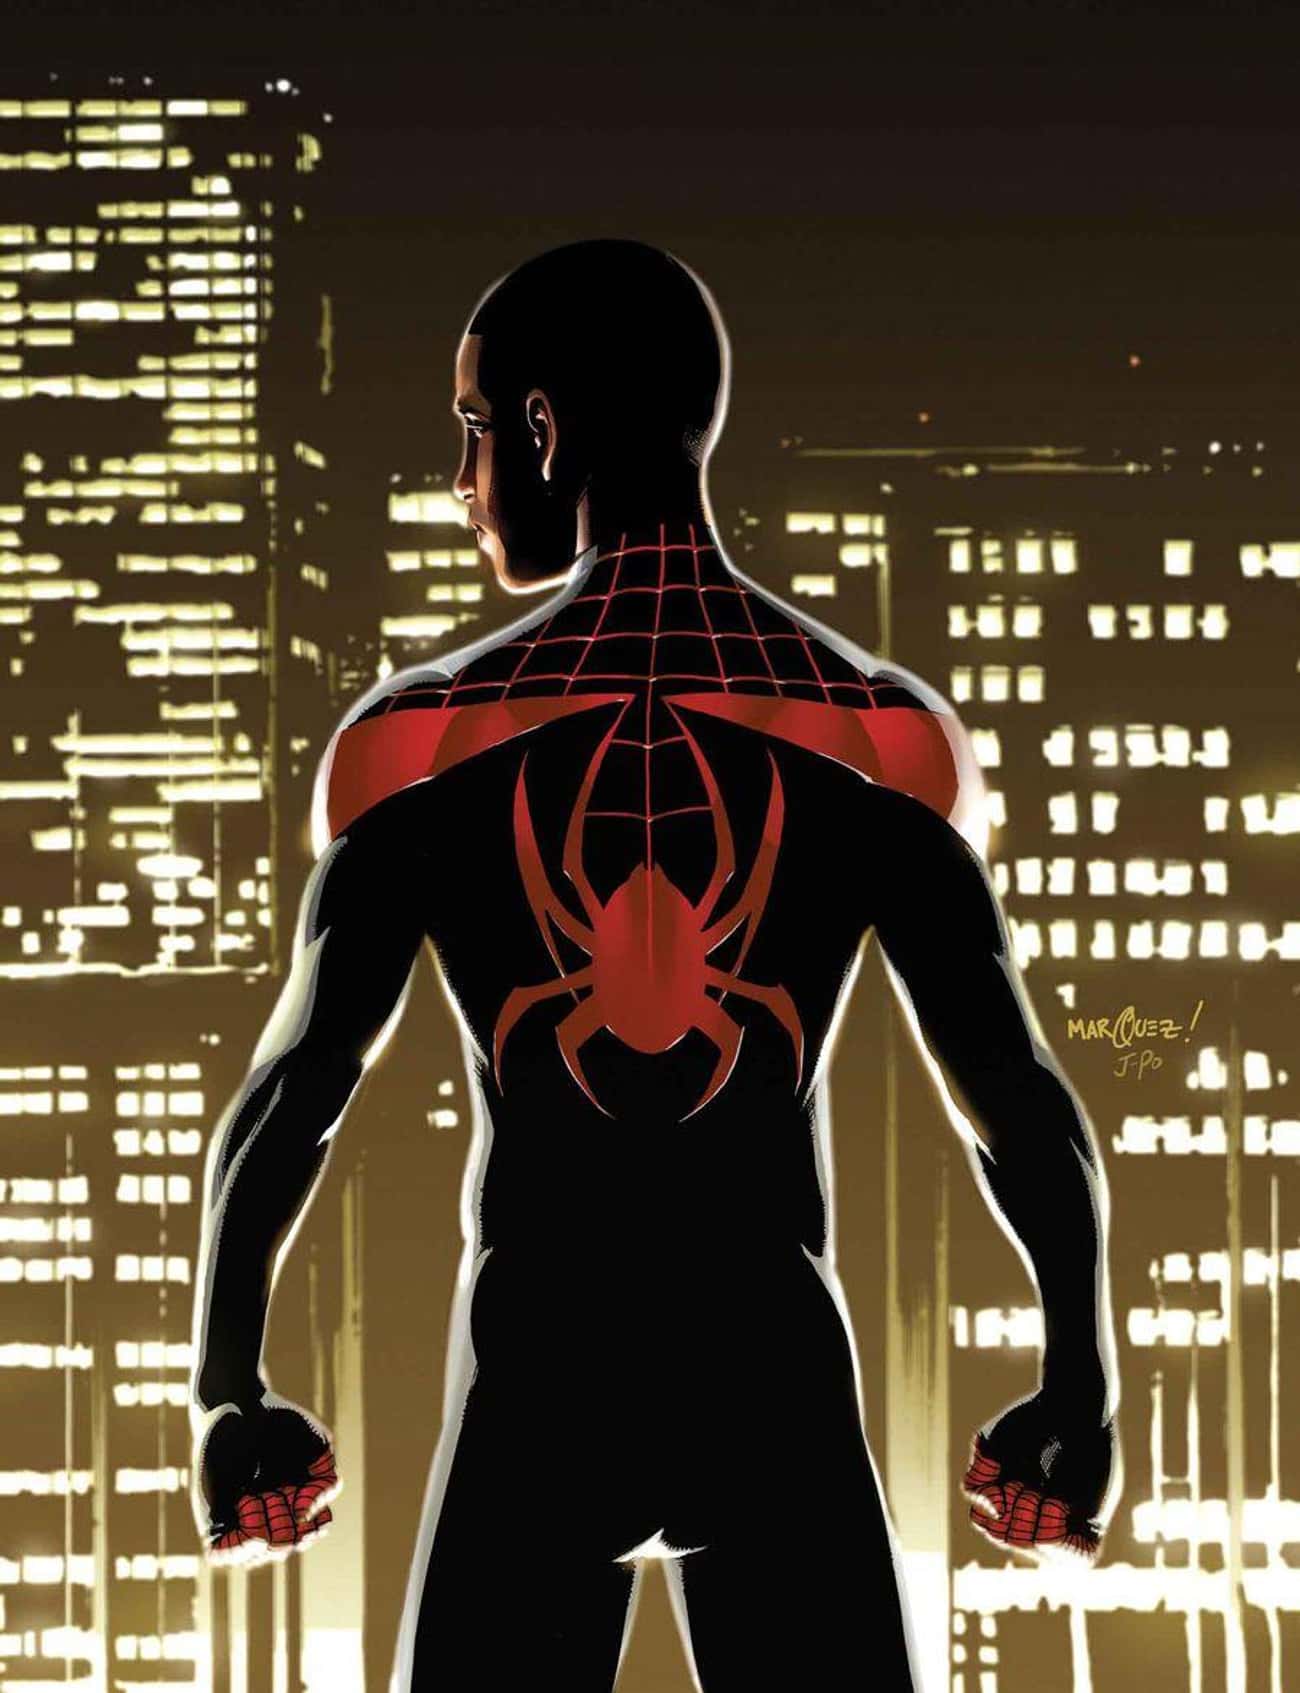 Miles Morales Is The Spider-Man Of A New Generation